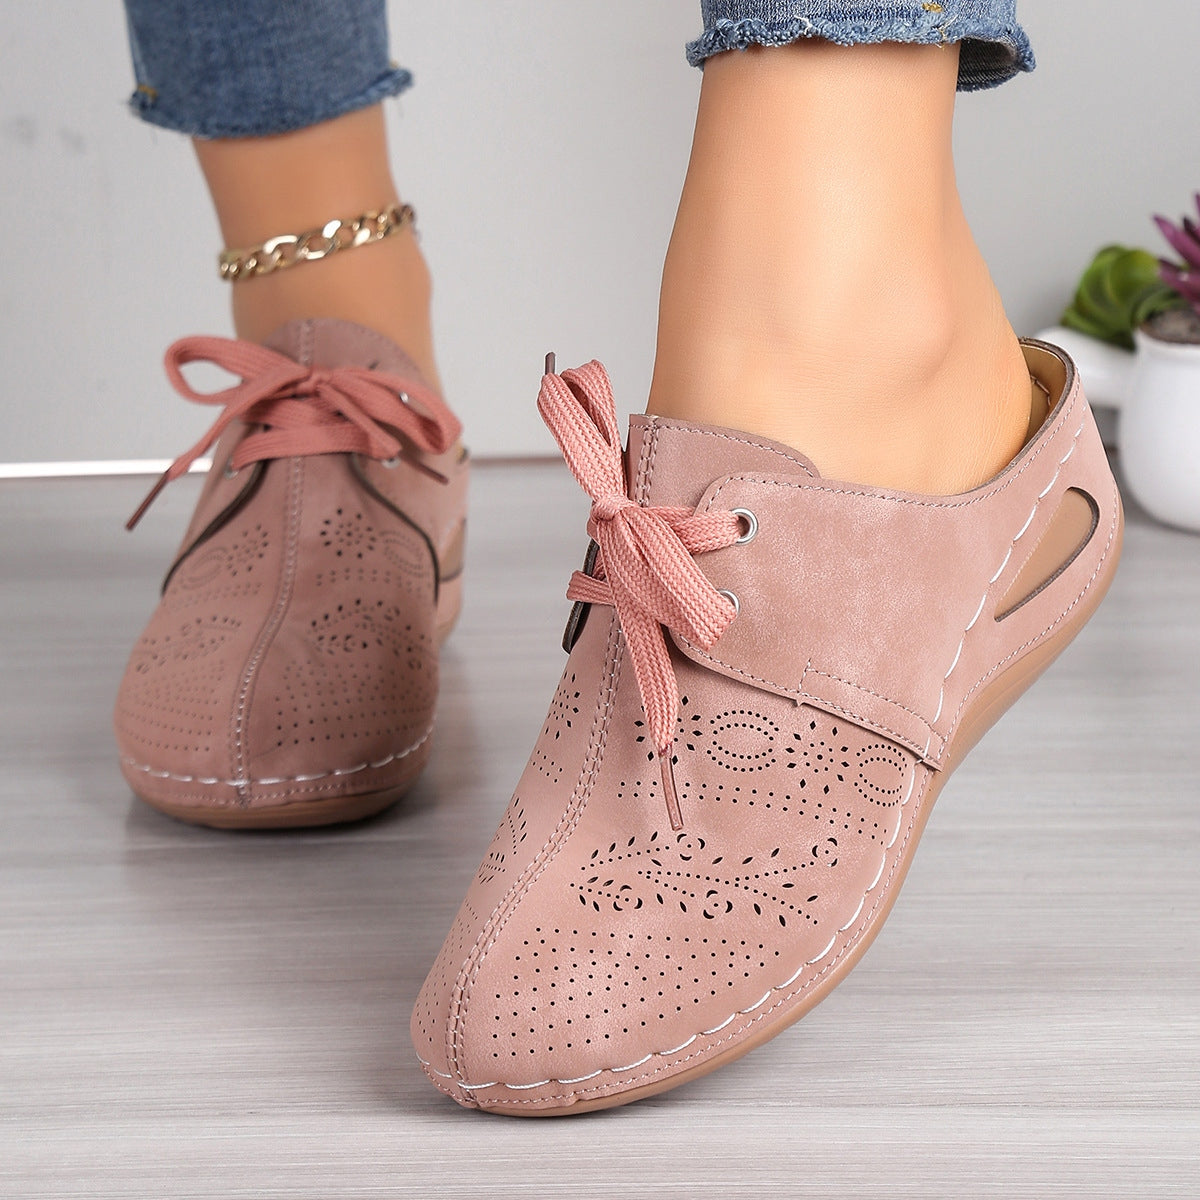 Lace-Up Round Toe Wedge Sandals Dusty Pink